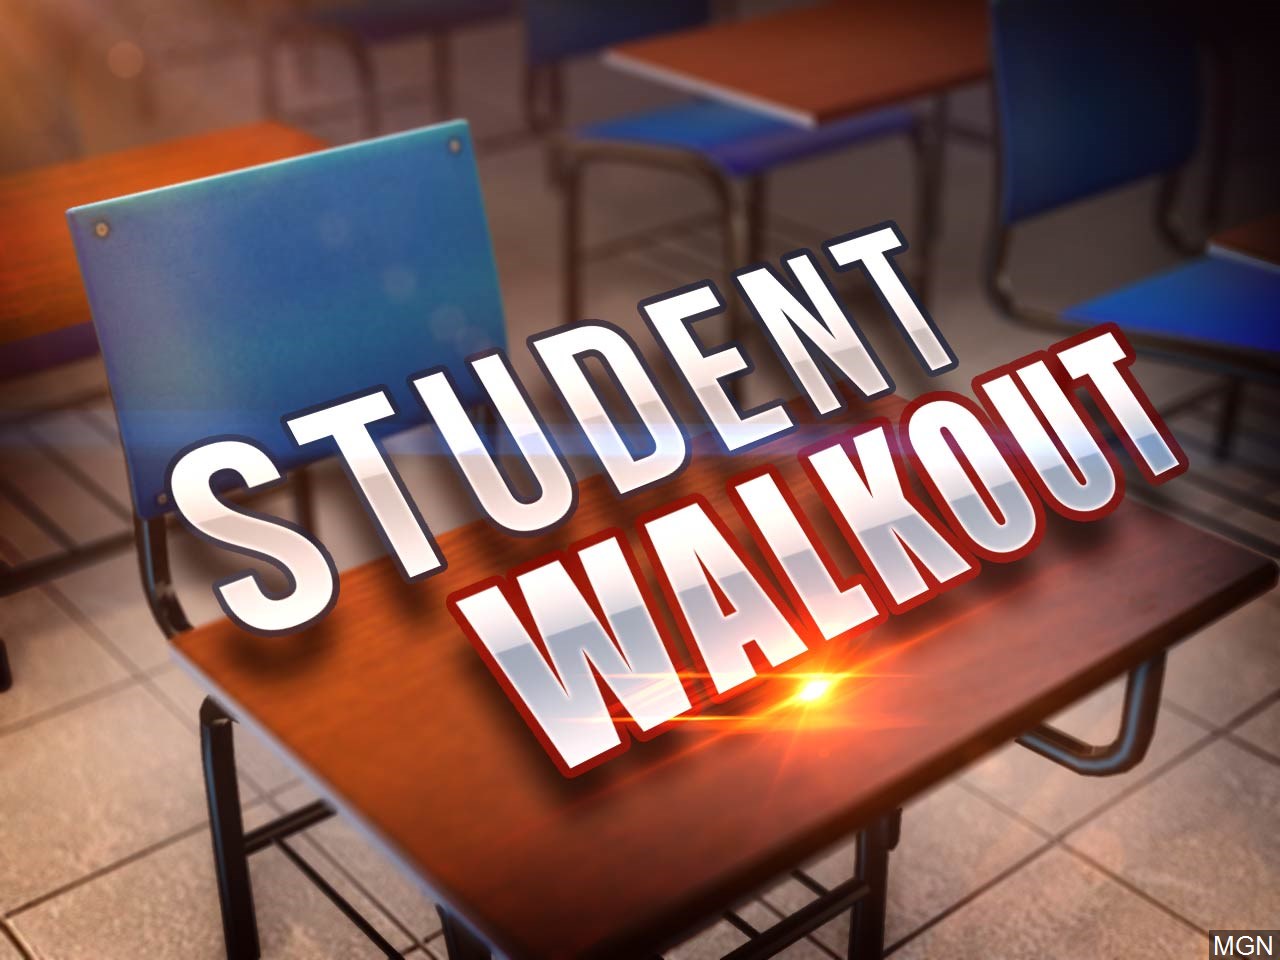 An Open Letter From A Teacher To Students Planning On Participating In The National Student Walkout”